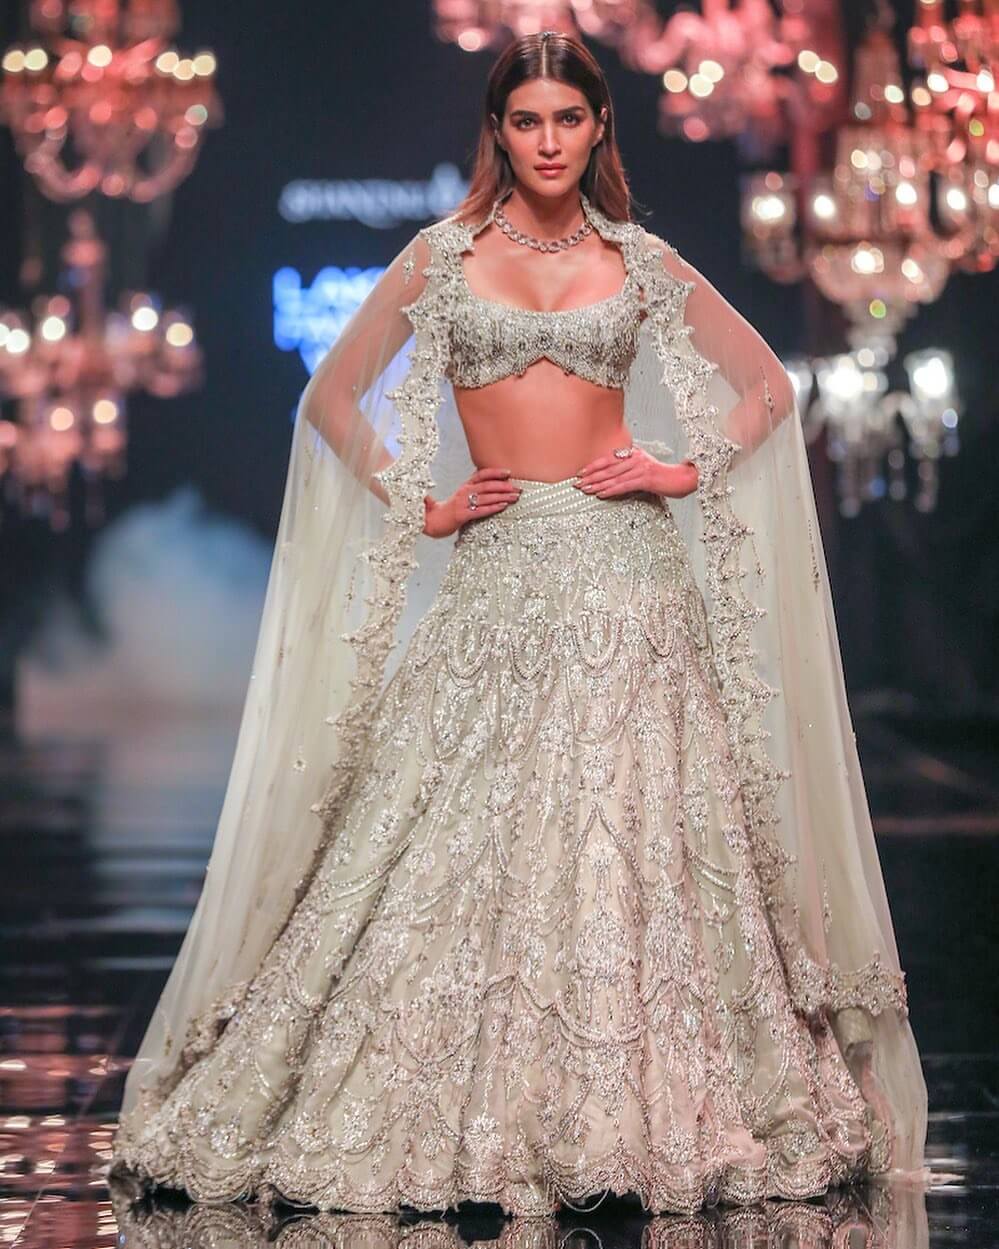 Lakme Fashion Week Bollywood Celebrities Spotted At The Runway - Kriti Sanon's Glamorous Look In Off-white Lehenga